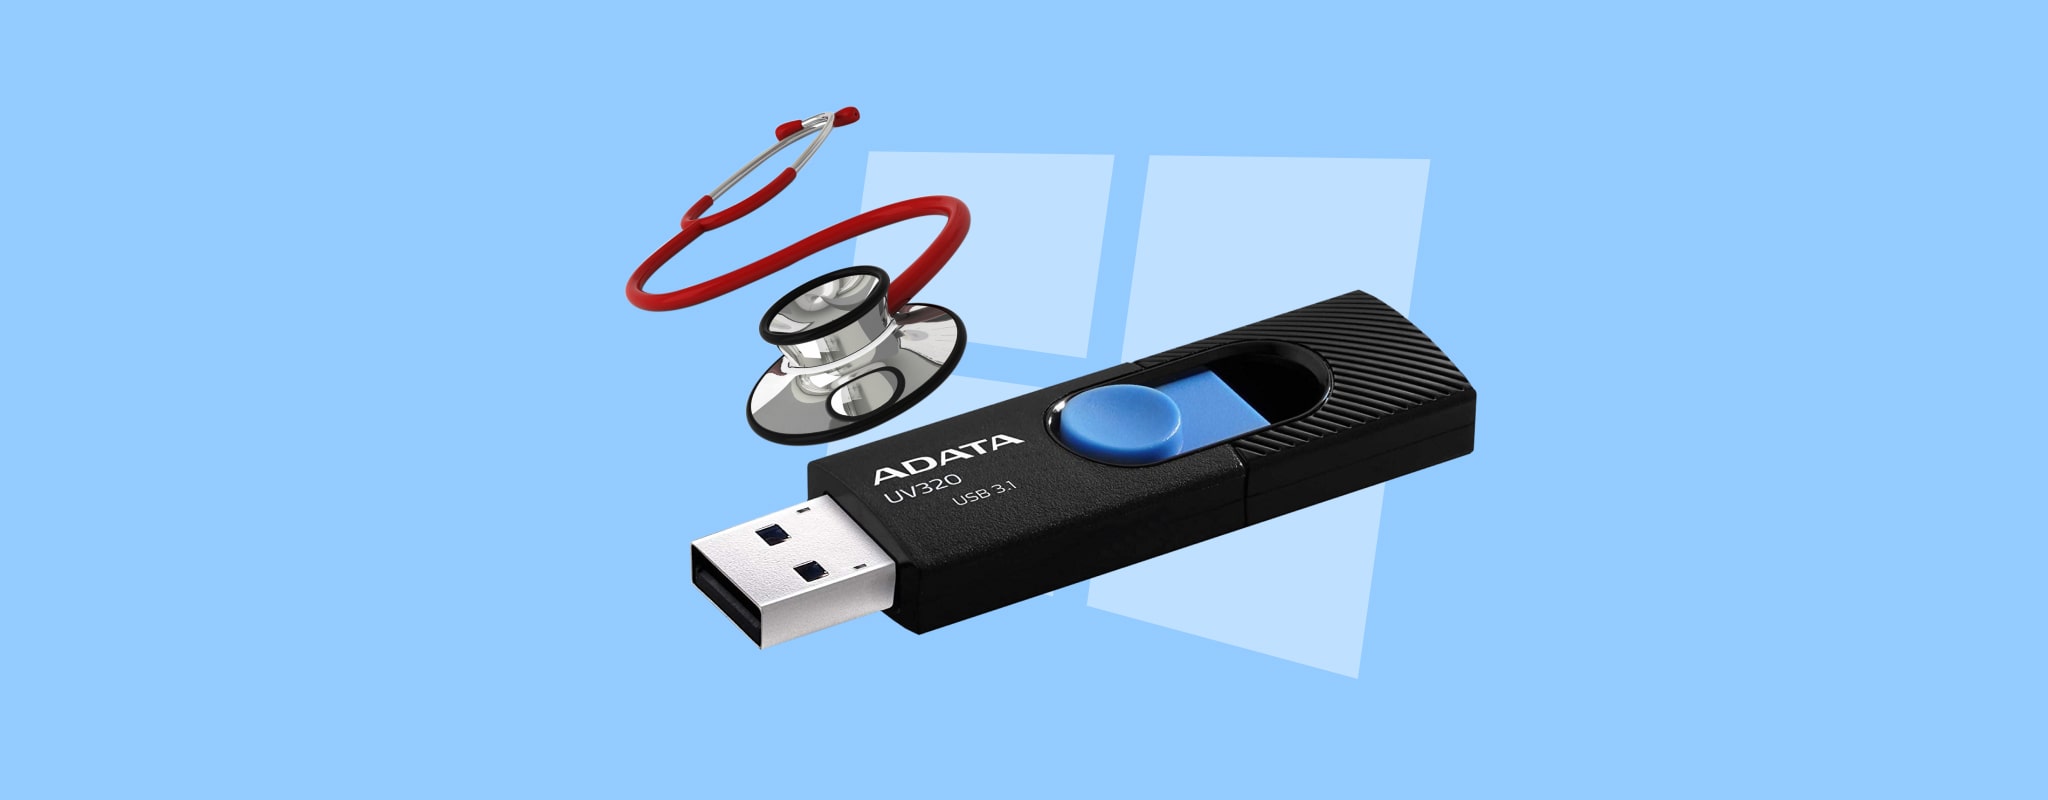 Specificitet Boghandel sagde How to Check USB Drive Health on Windows: Detect the Errors